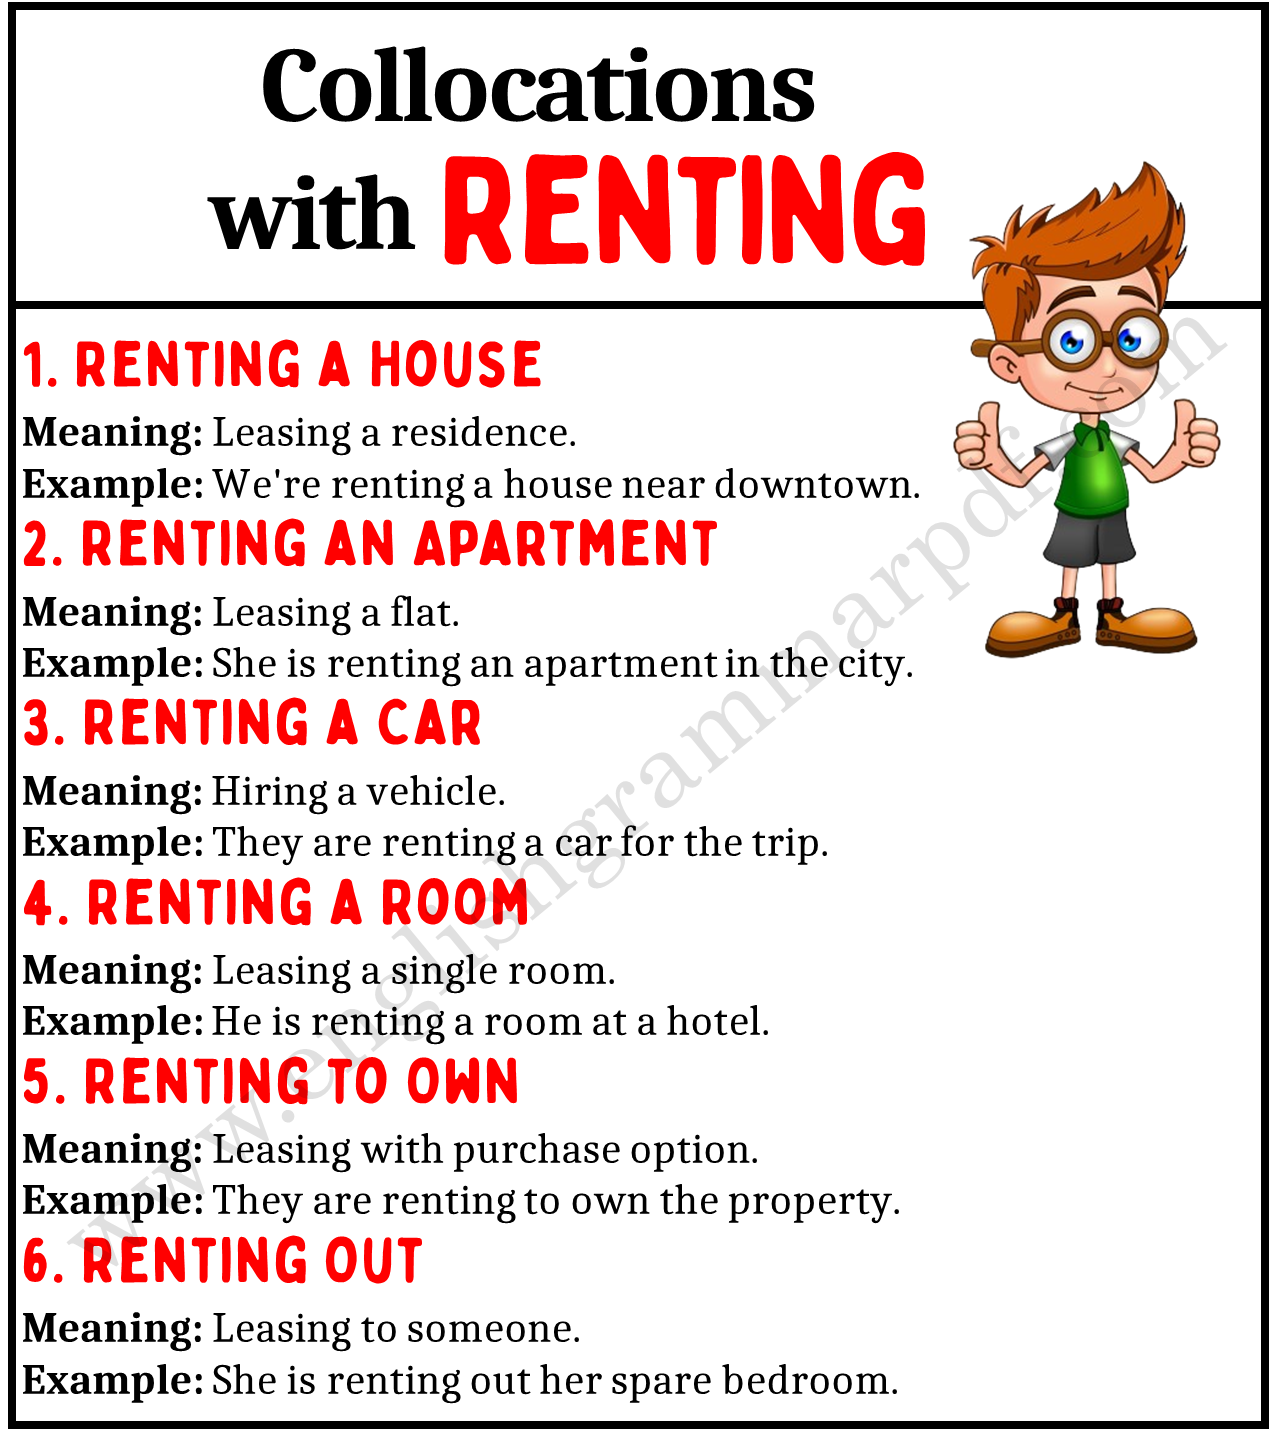 Collocations Related to Renting